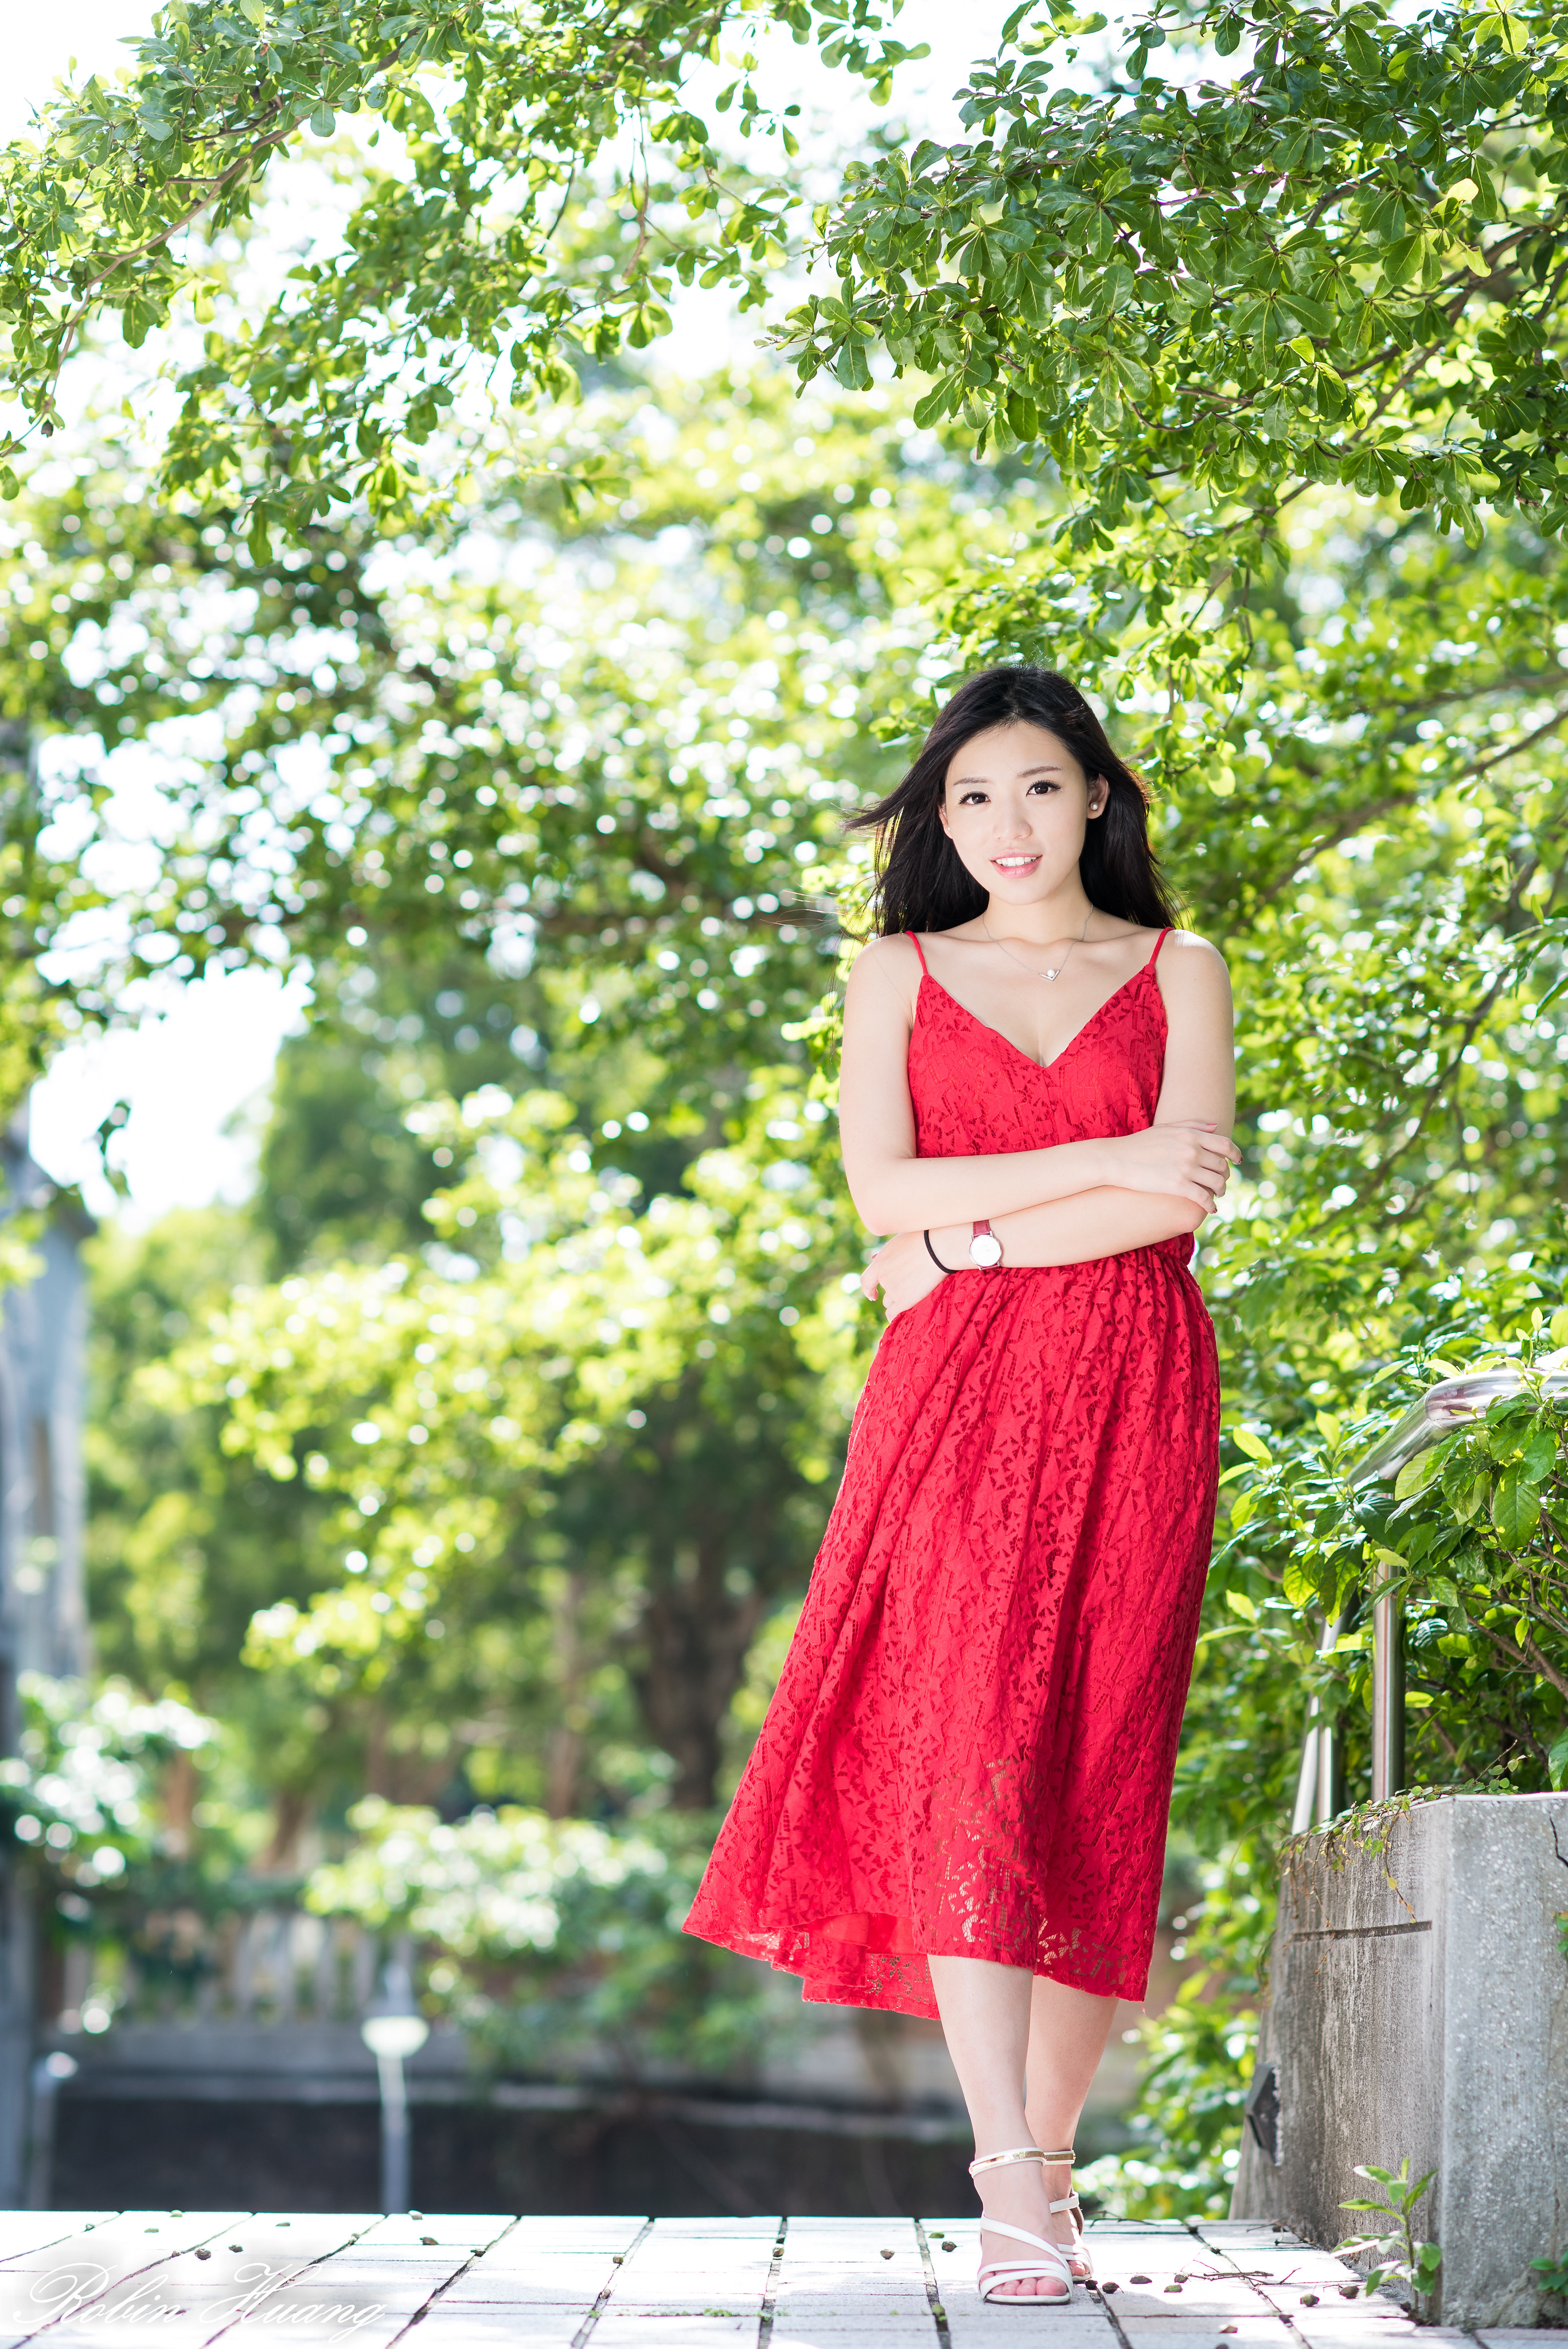 People 2734x4096 Kiki Hsieh model women Asian red dress arms crossed women outdoors portrait display Robin Huang